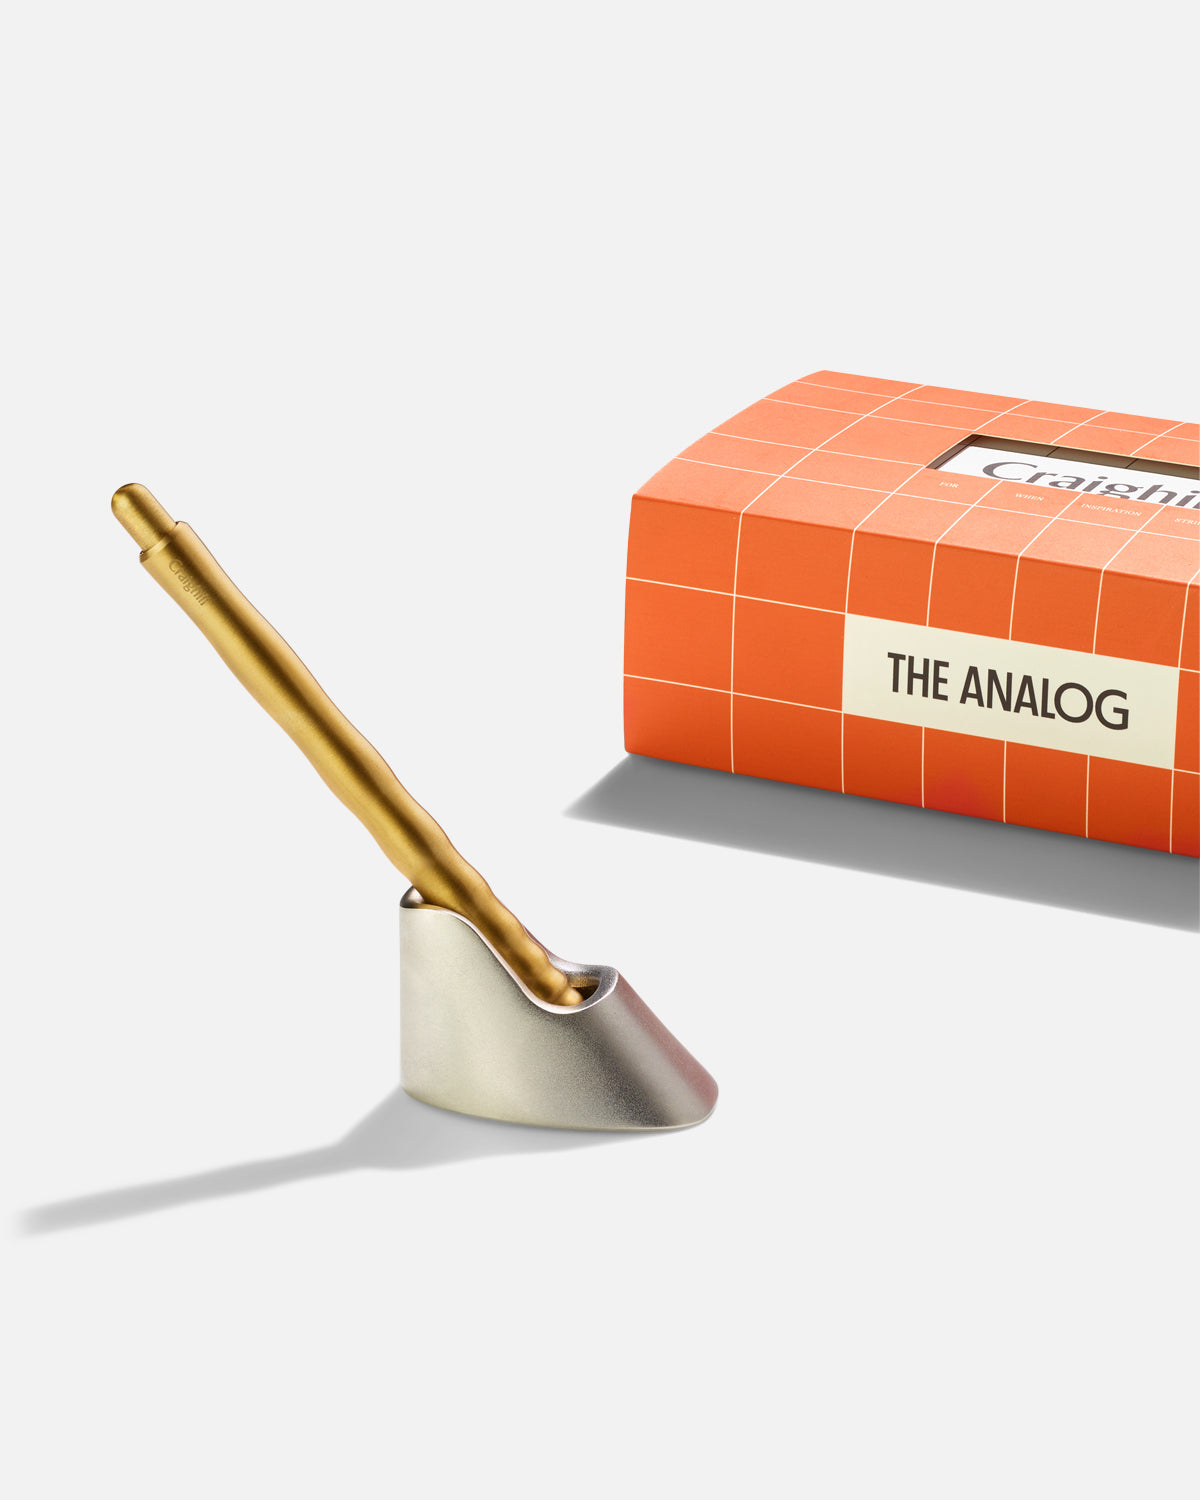 The Analog Gift Box by Craighill